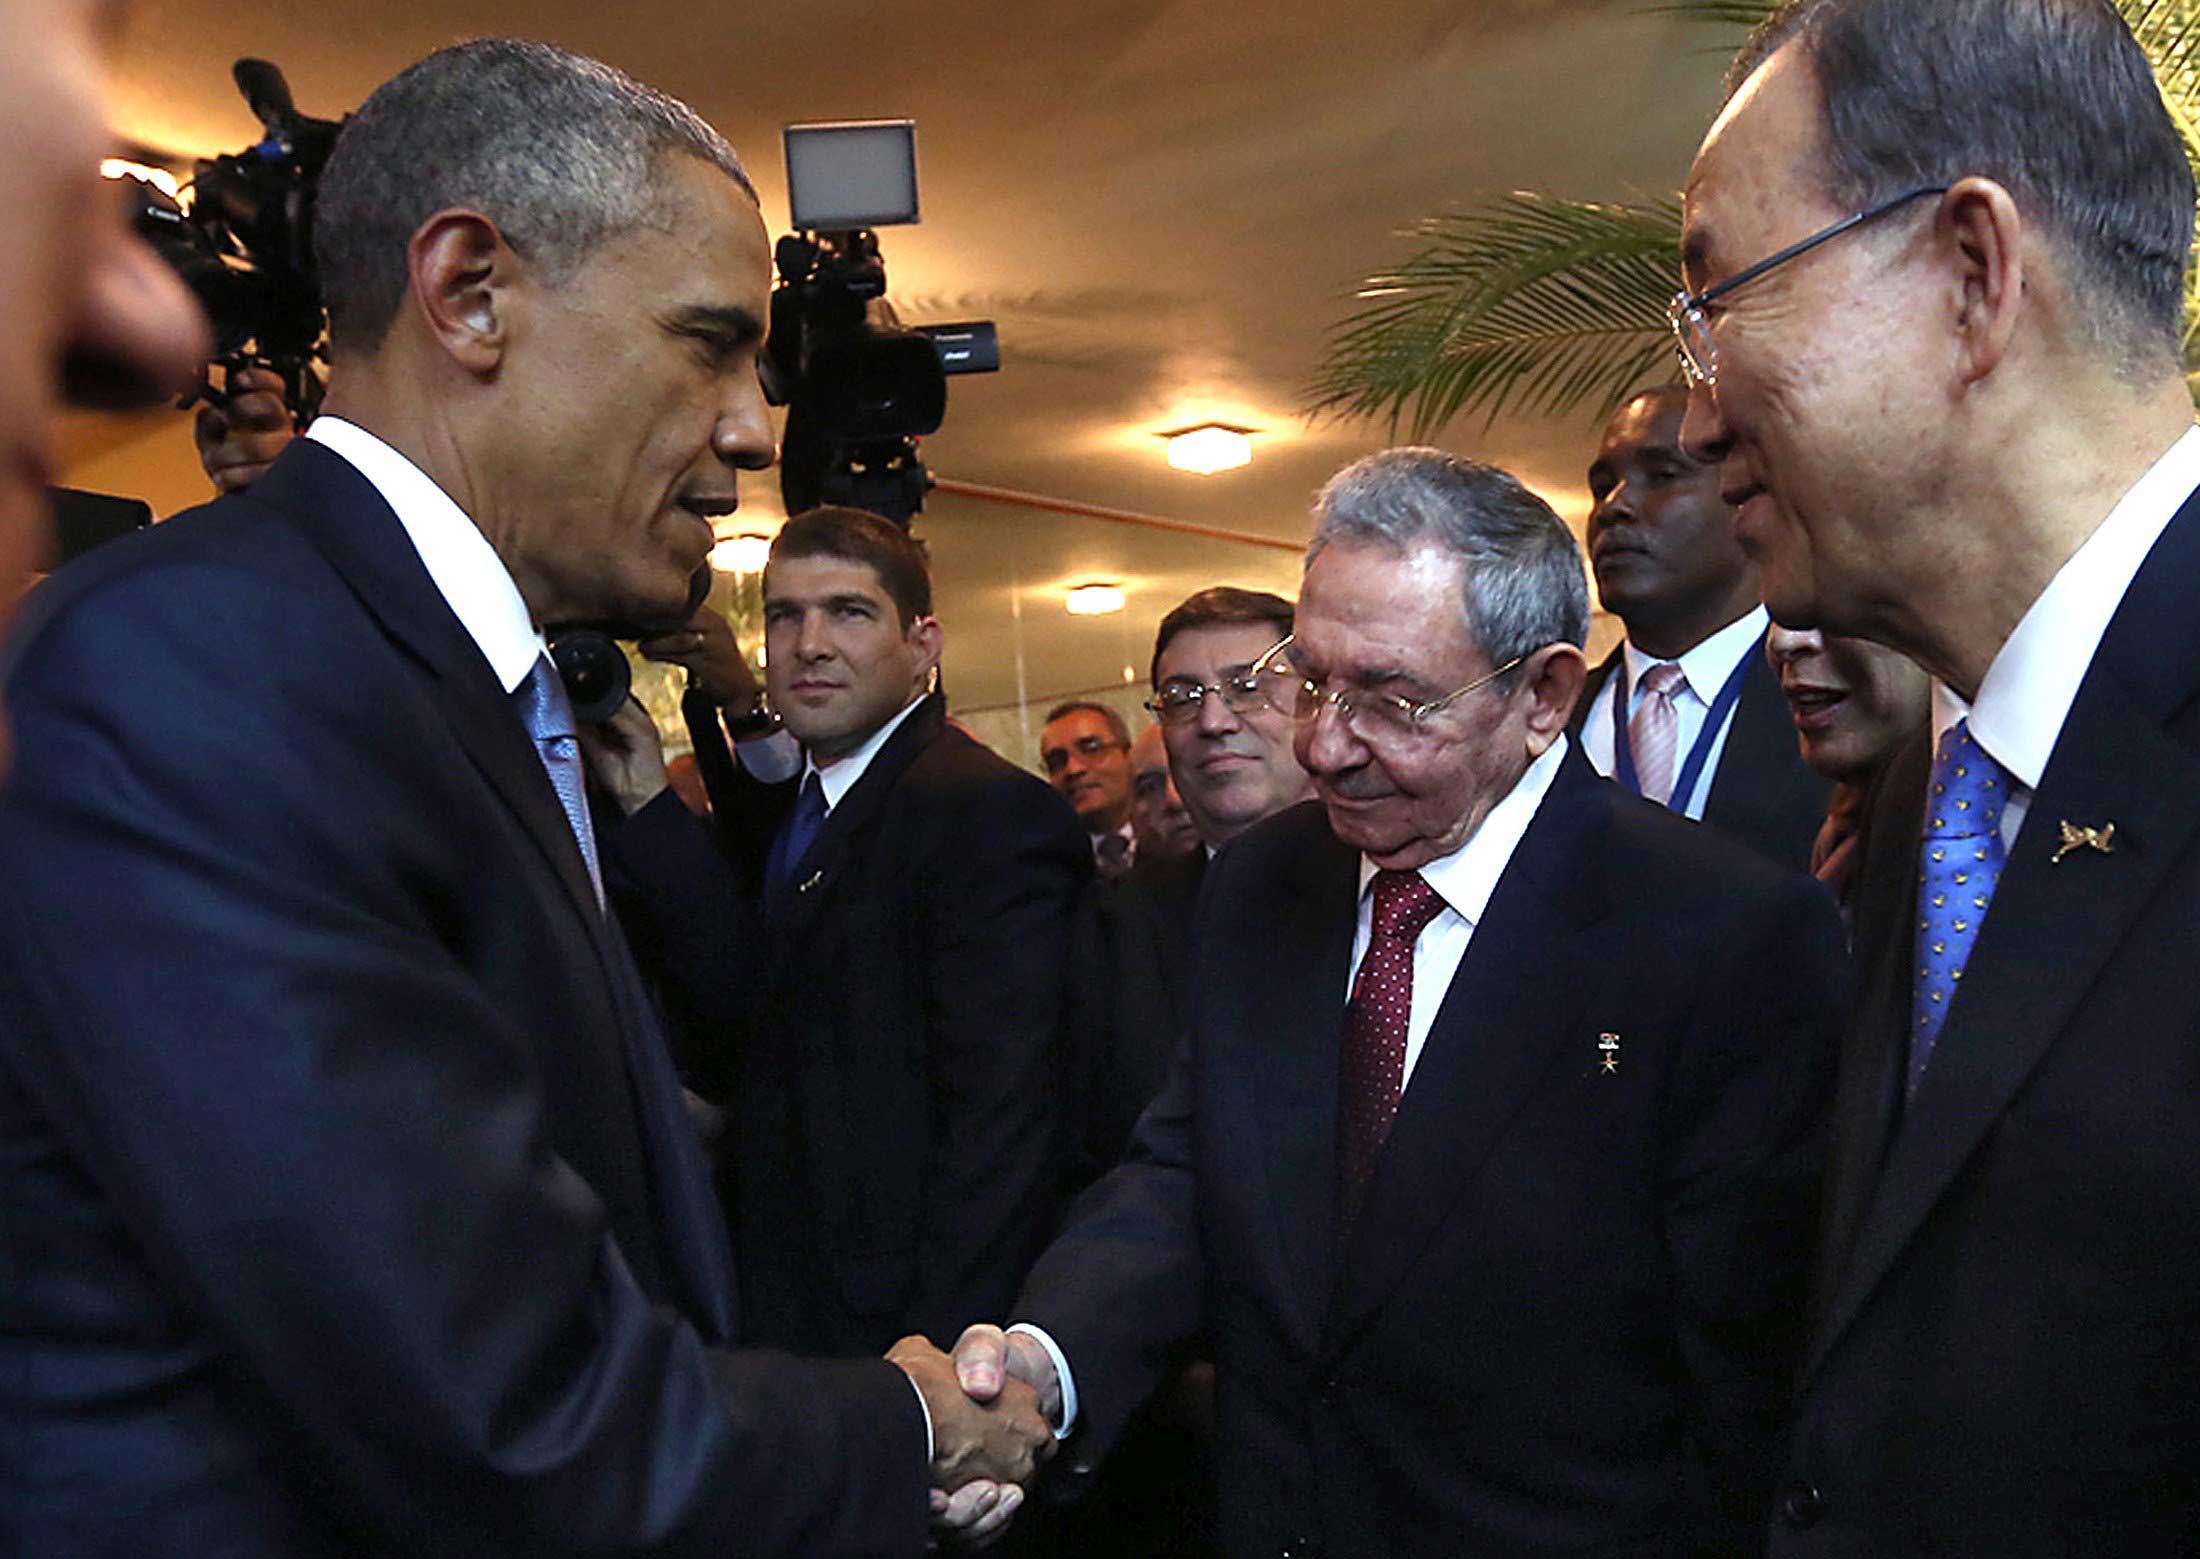 Cuban President Raul Castro (2-R) and US President Barack Obama (L) shaking hands as Castro's grandson and bodyguard Raul Rodriguez Castro (2-L), Cuban Foreign Minister Bruno Rodriguez (C) and United Nations chief Ban Ki-moon (R) look on, moments before the opening ceremony of the VII Americas Summit, in Panama City on April 10, 2015. (AFP/Getty Images)